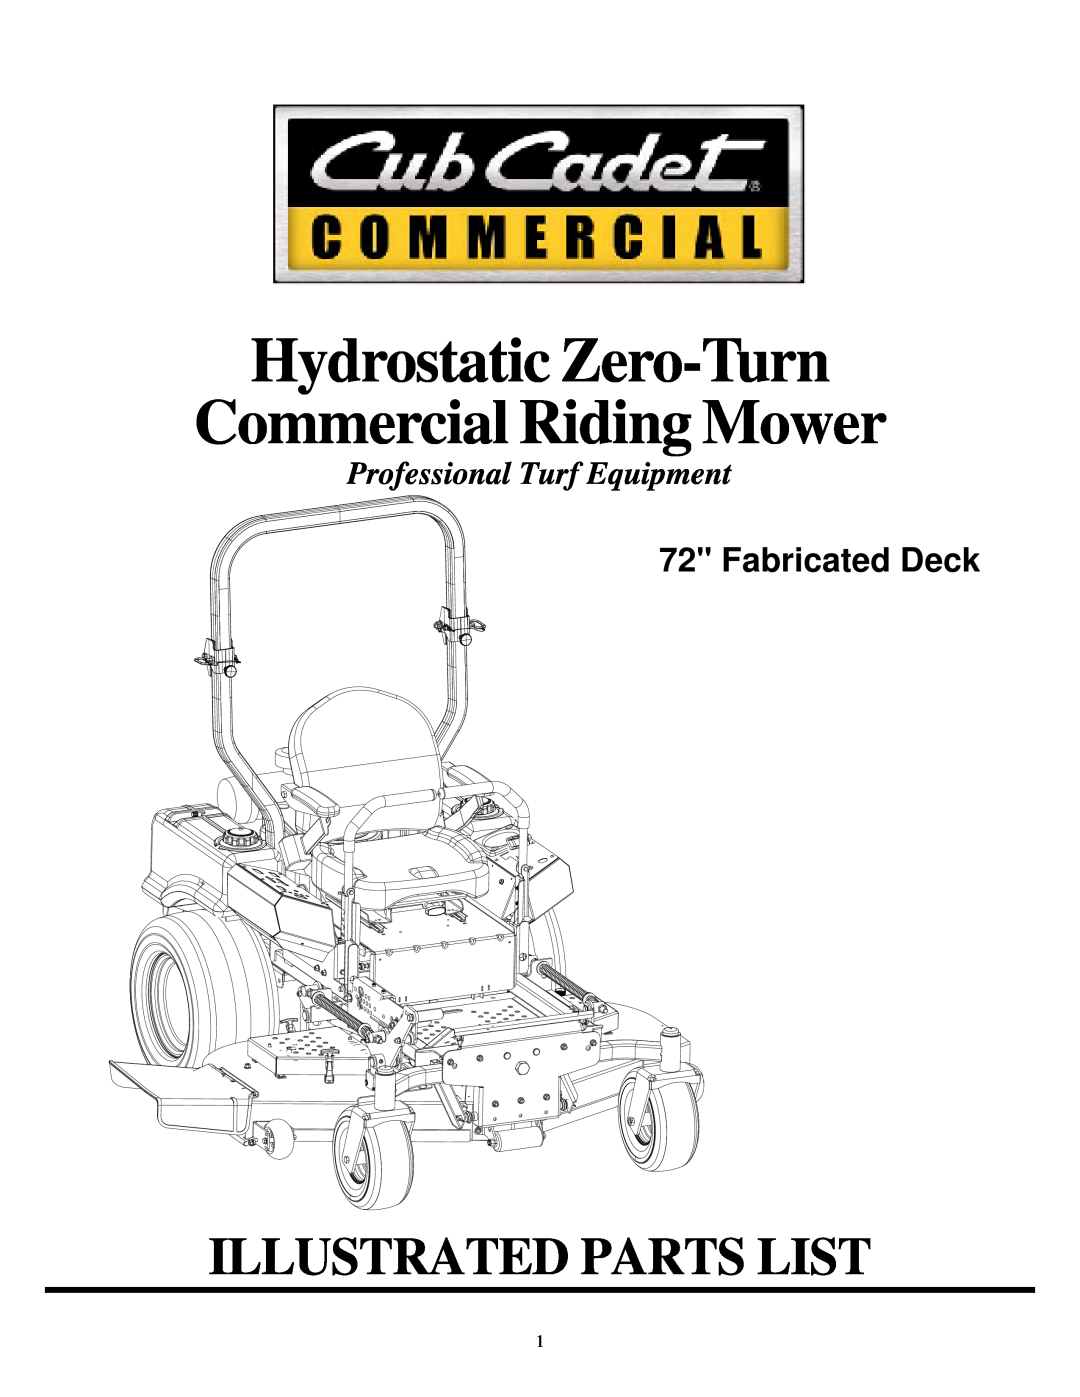 Cub Cadet 53AI8CTZ750 manual Hydrostatic Zero-Turn Commercial Riding Mower, Illustrated Parts List, Fabricated Deck 